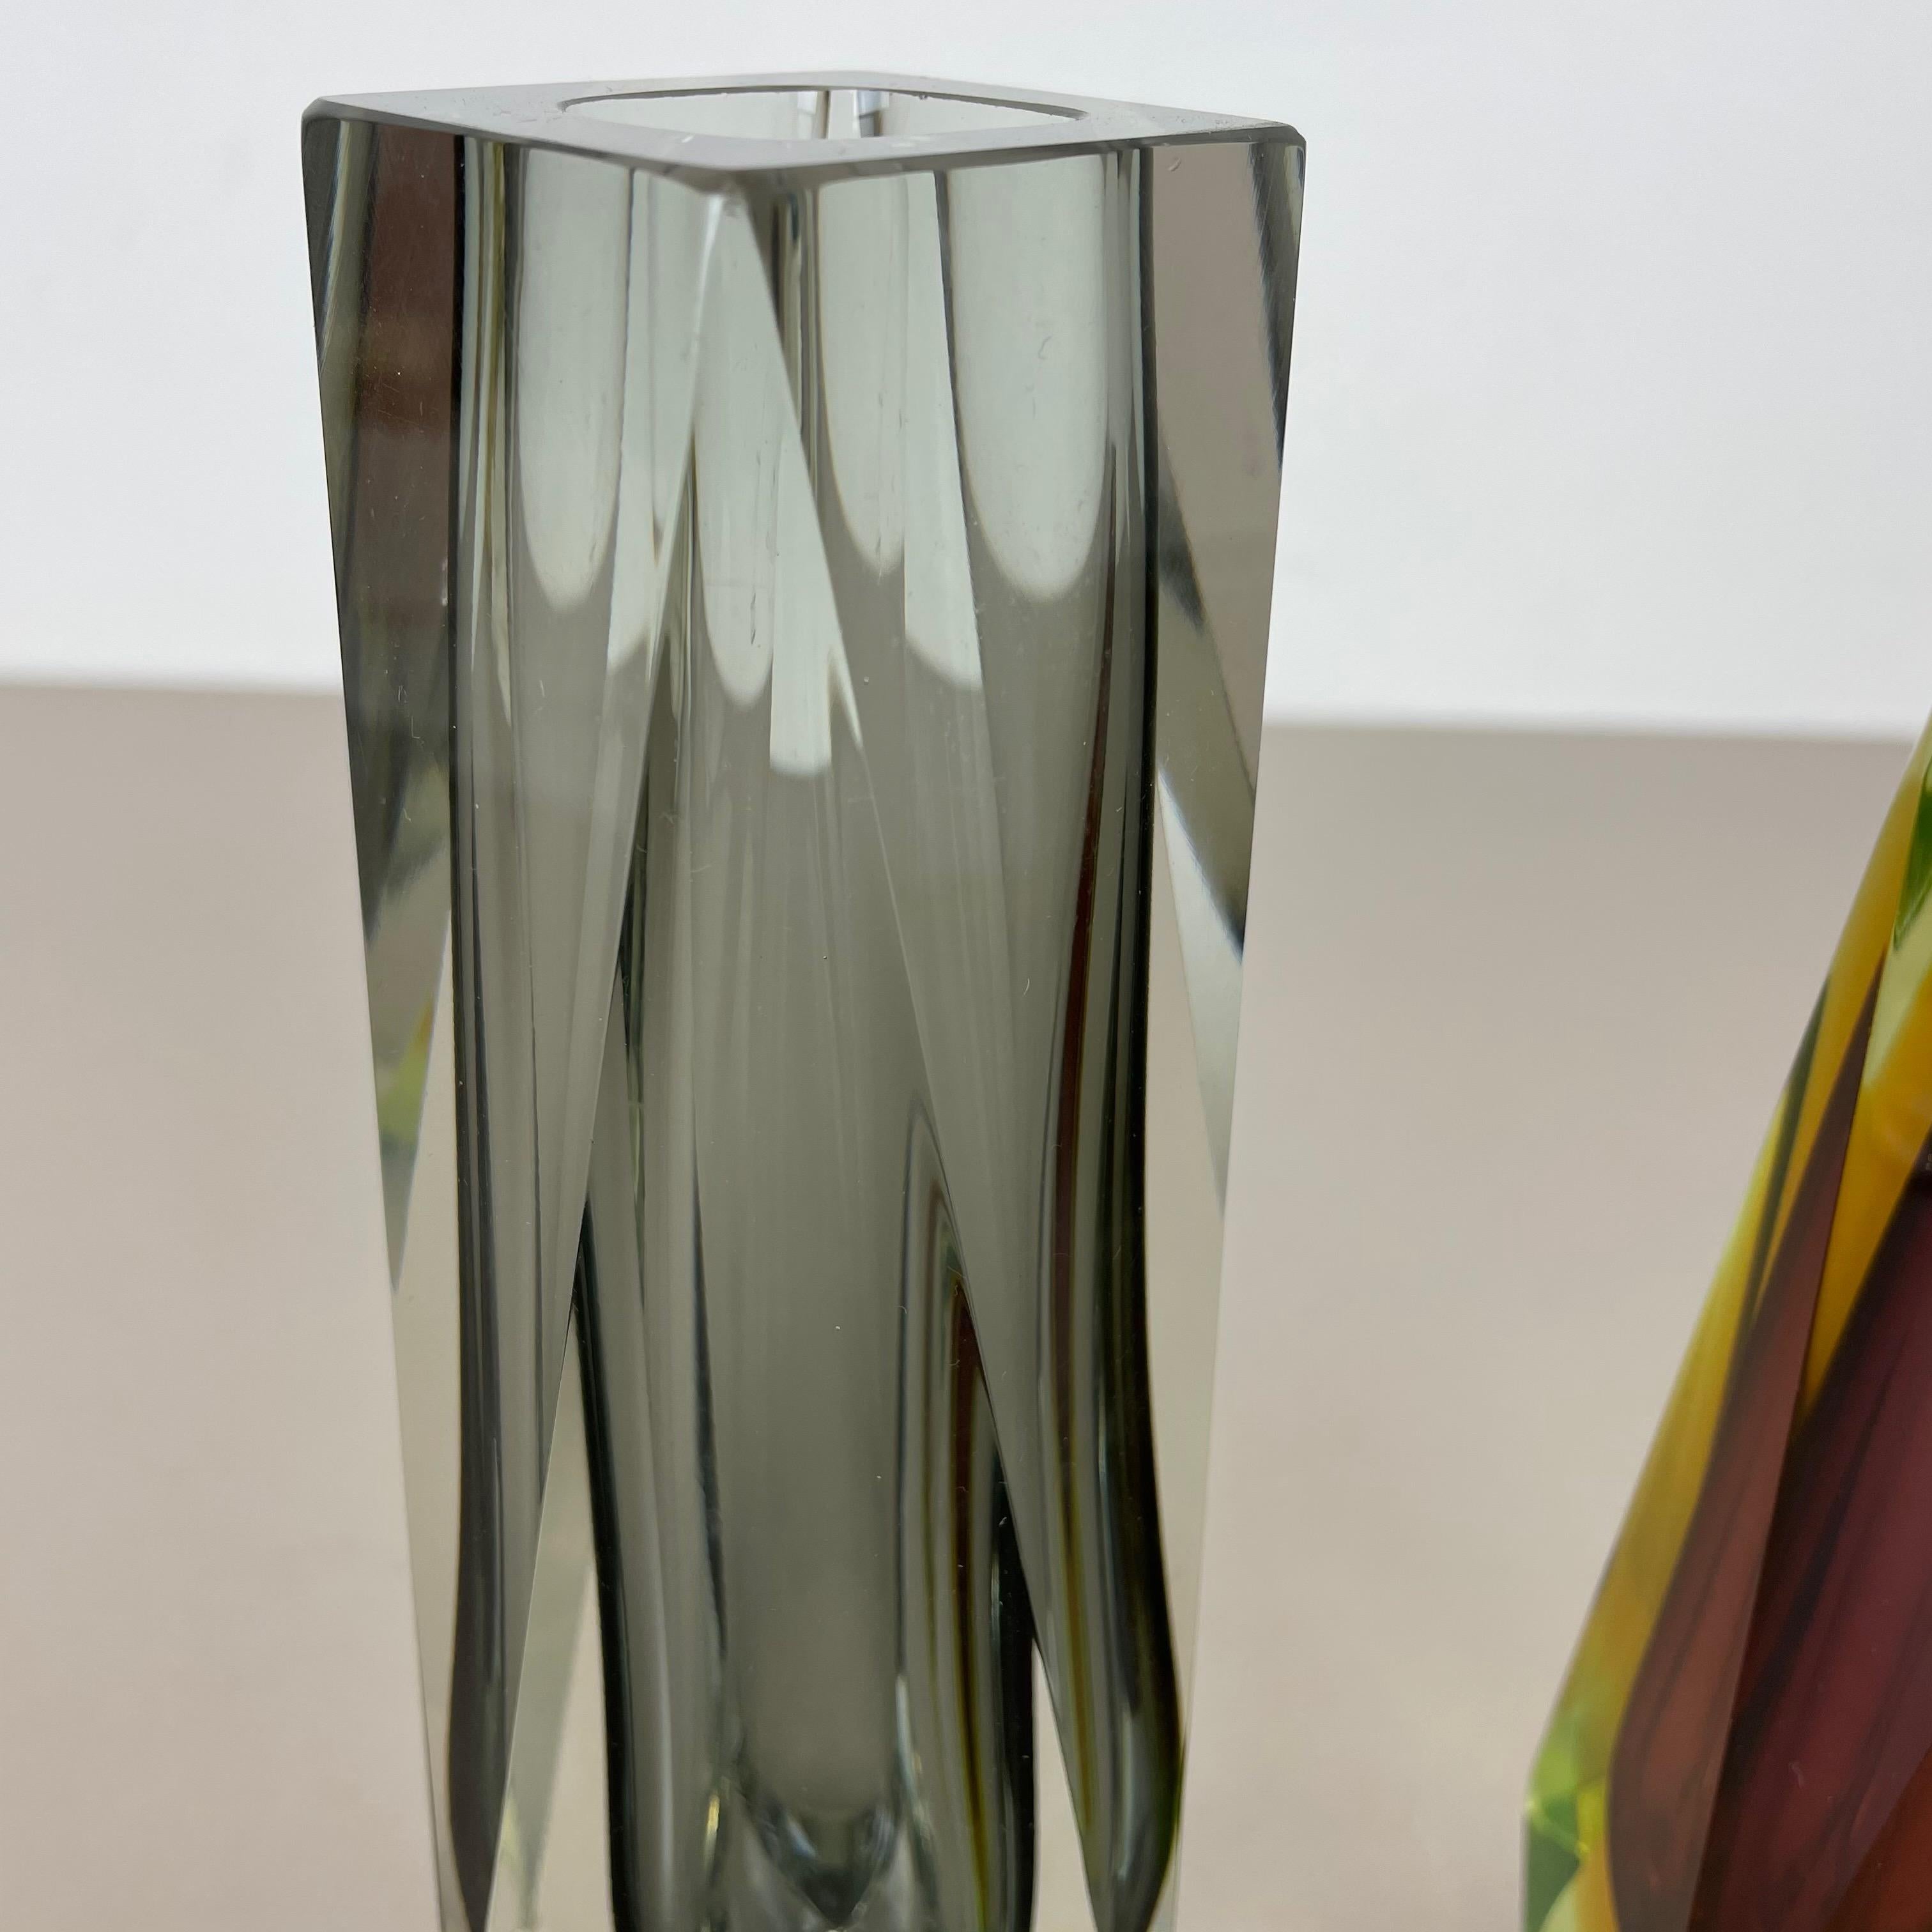 Rare Set of 2 Faceted Murano Glass Sommerso Vases, Italy, 1970s For Sale 2